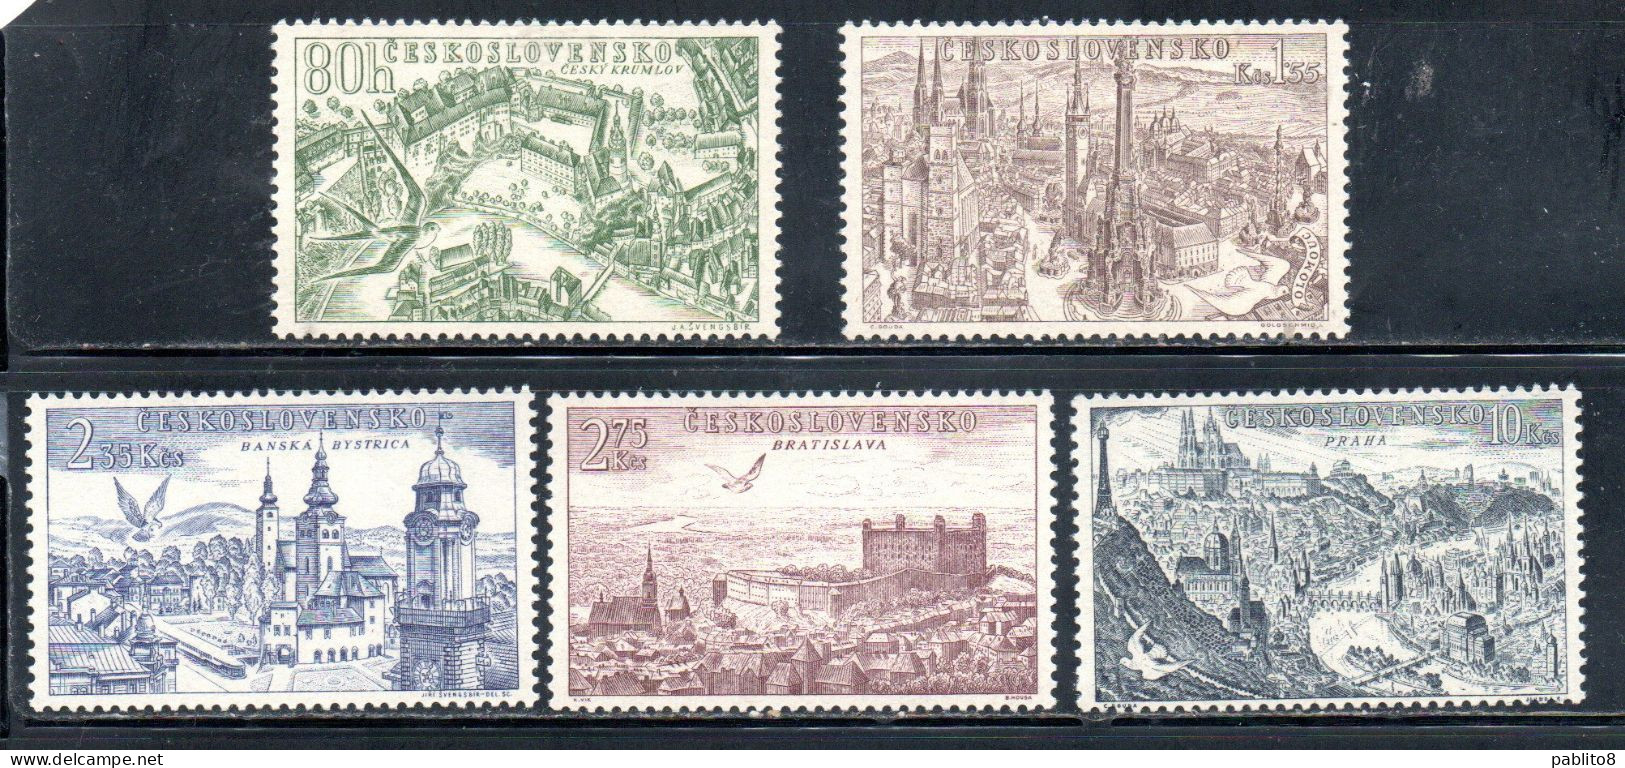 CZECHOSLOVAKIA CECOSLOVACCHIA 1955 AIR POST MAIL AIRMAIL VIEWS COMPLETE SET SERIE COMPLETA MNH - Luchtpost